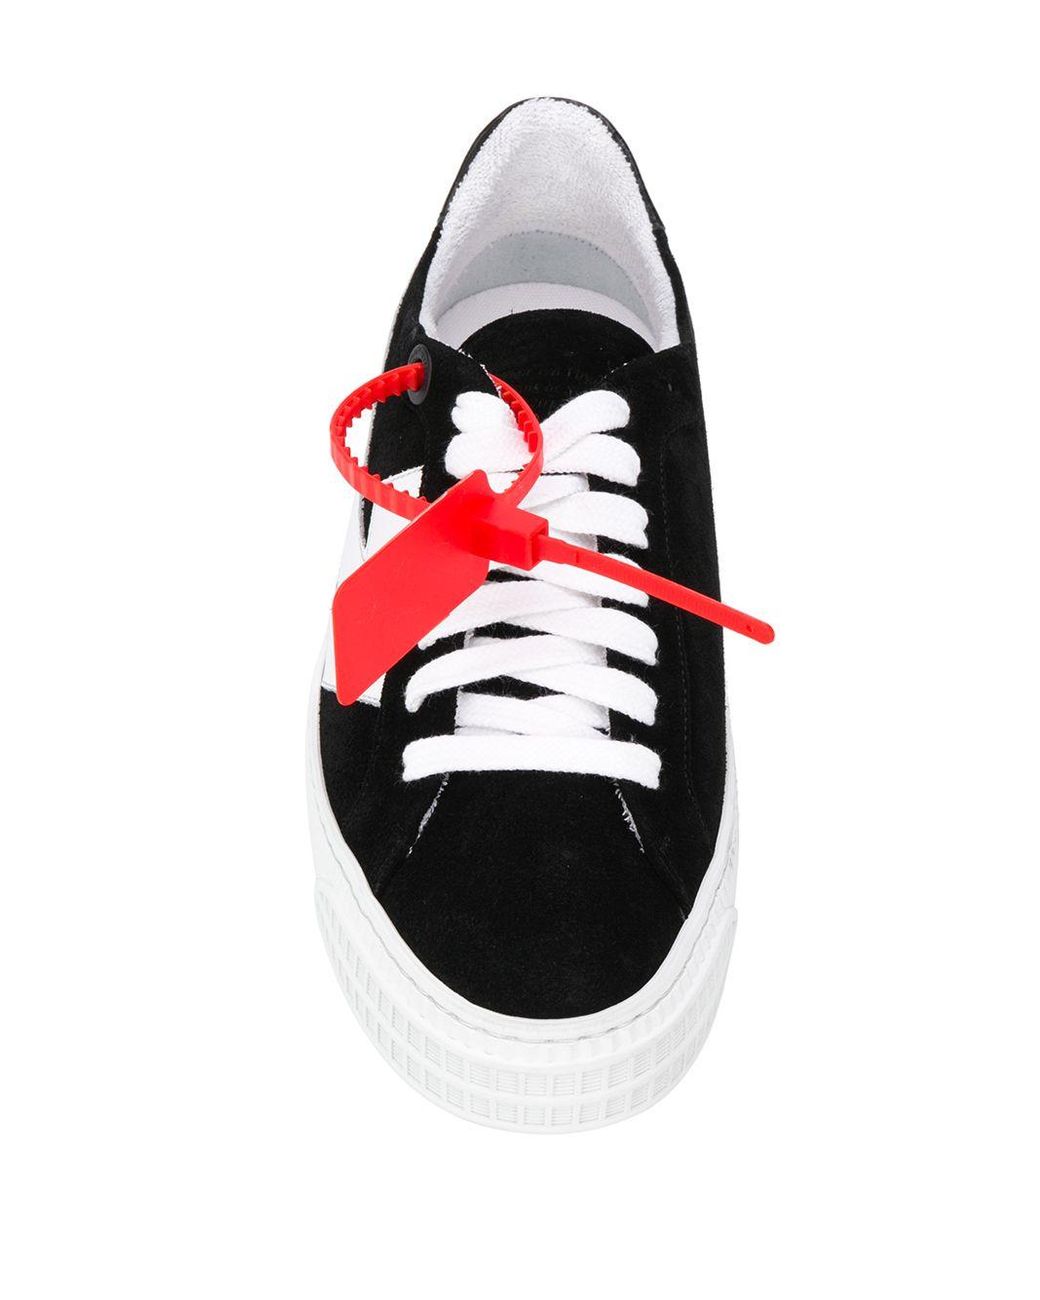 Save 7% Off-White c/o Virgil Abloh Box Arrow Logo Red Sneaker for Men Mens Shoes Trainers Low-top trainers 